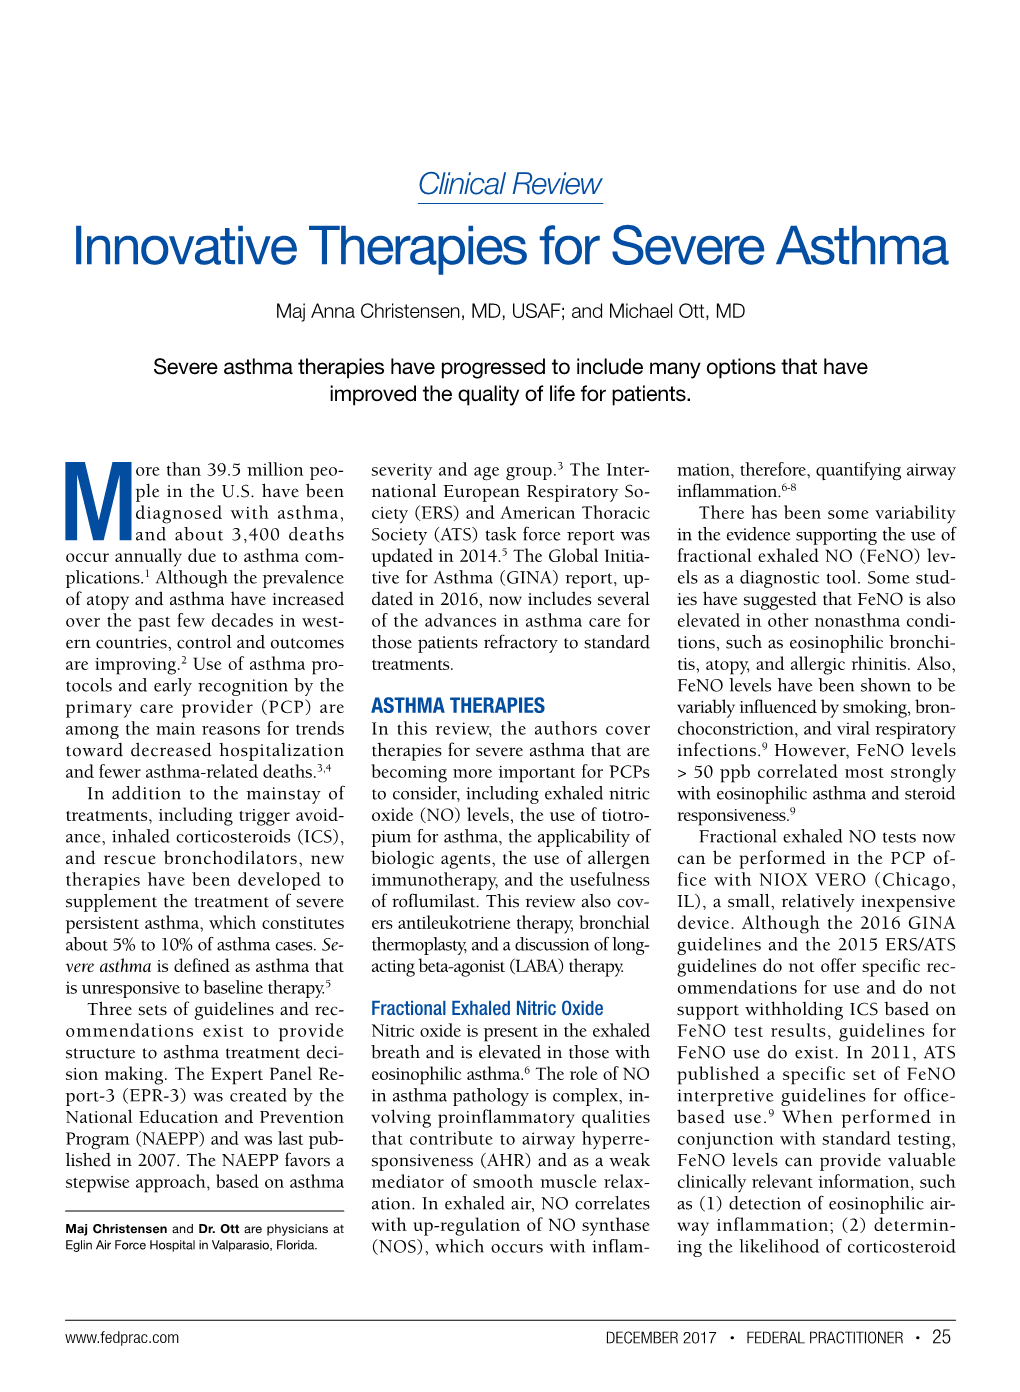 Innovative Therapies for Severe Asthma